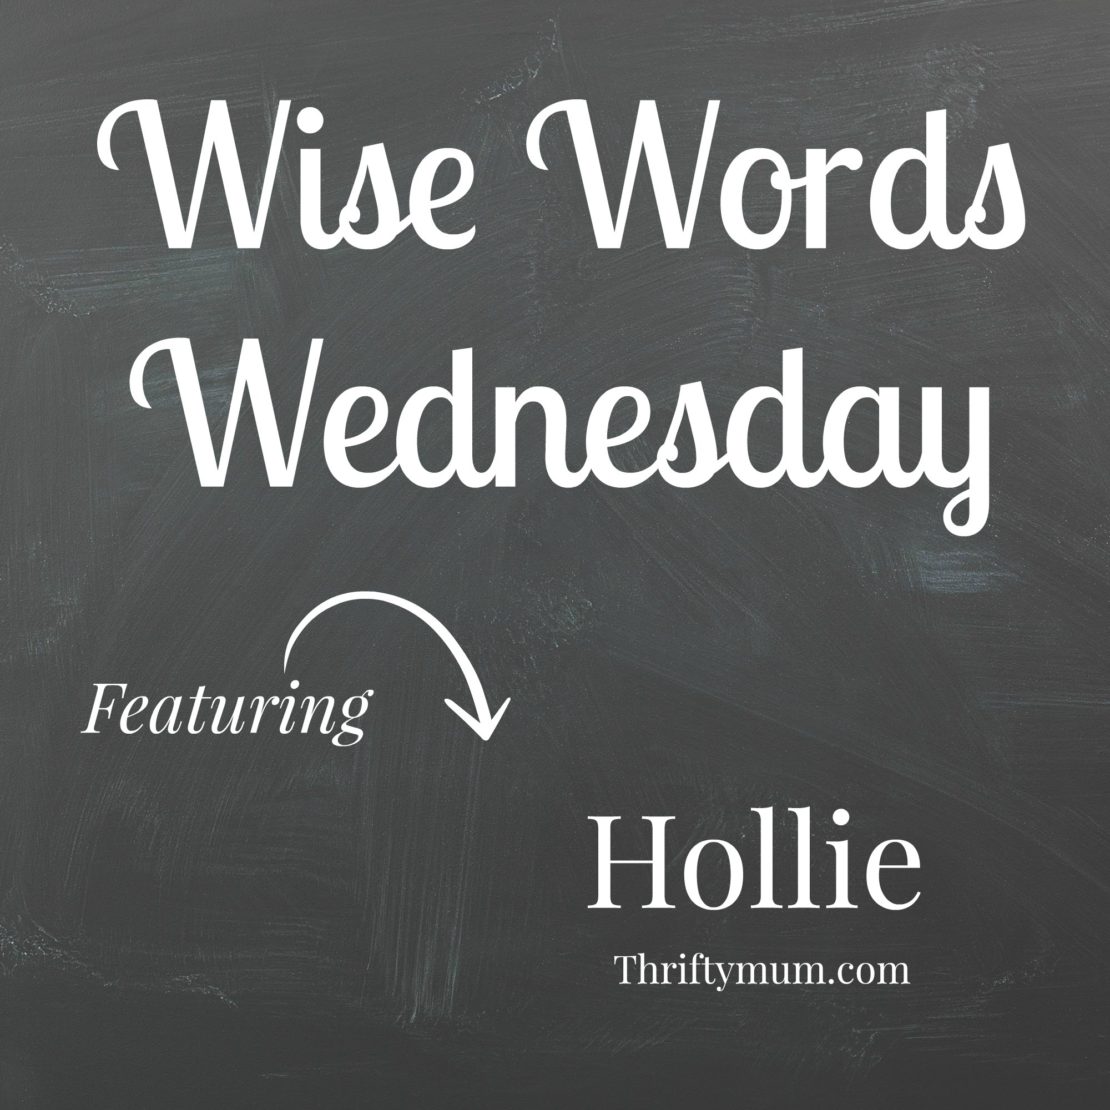 Wise Words Wednesday with Hollie